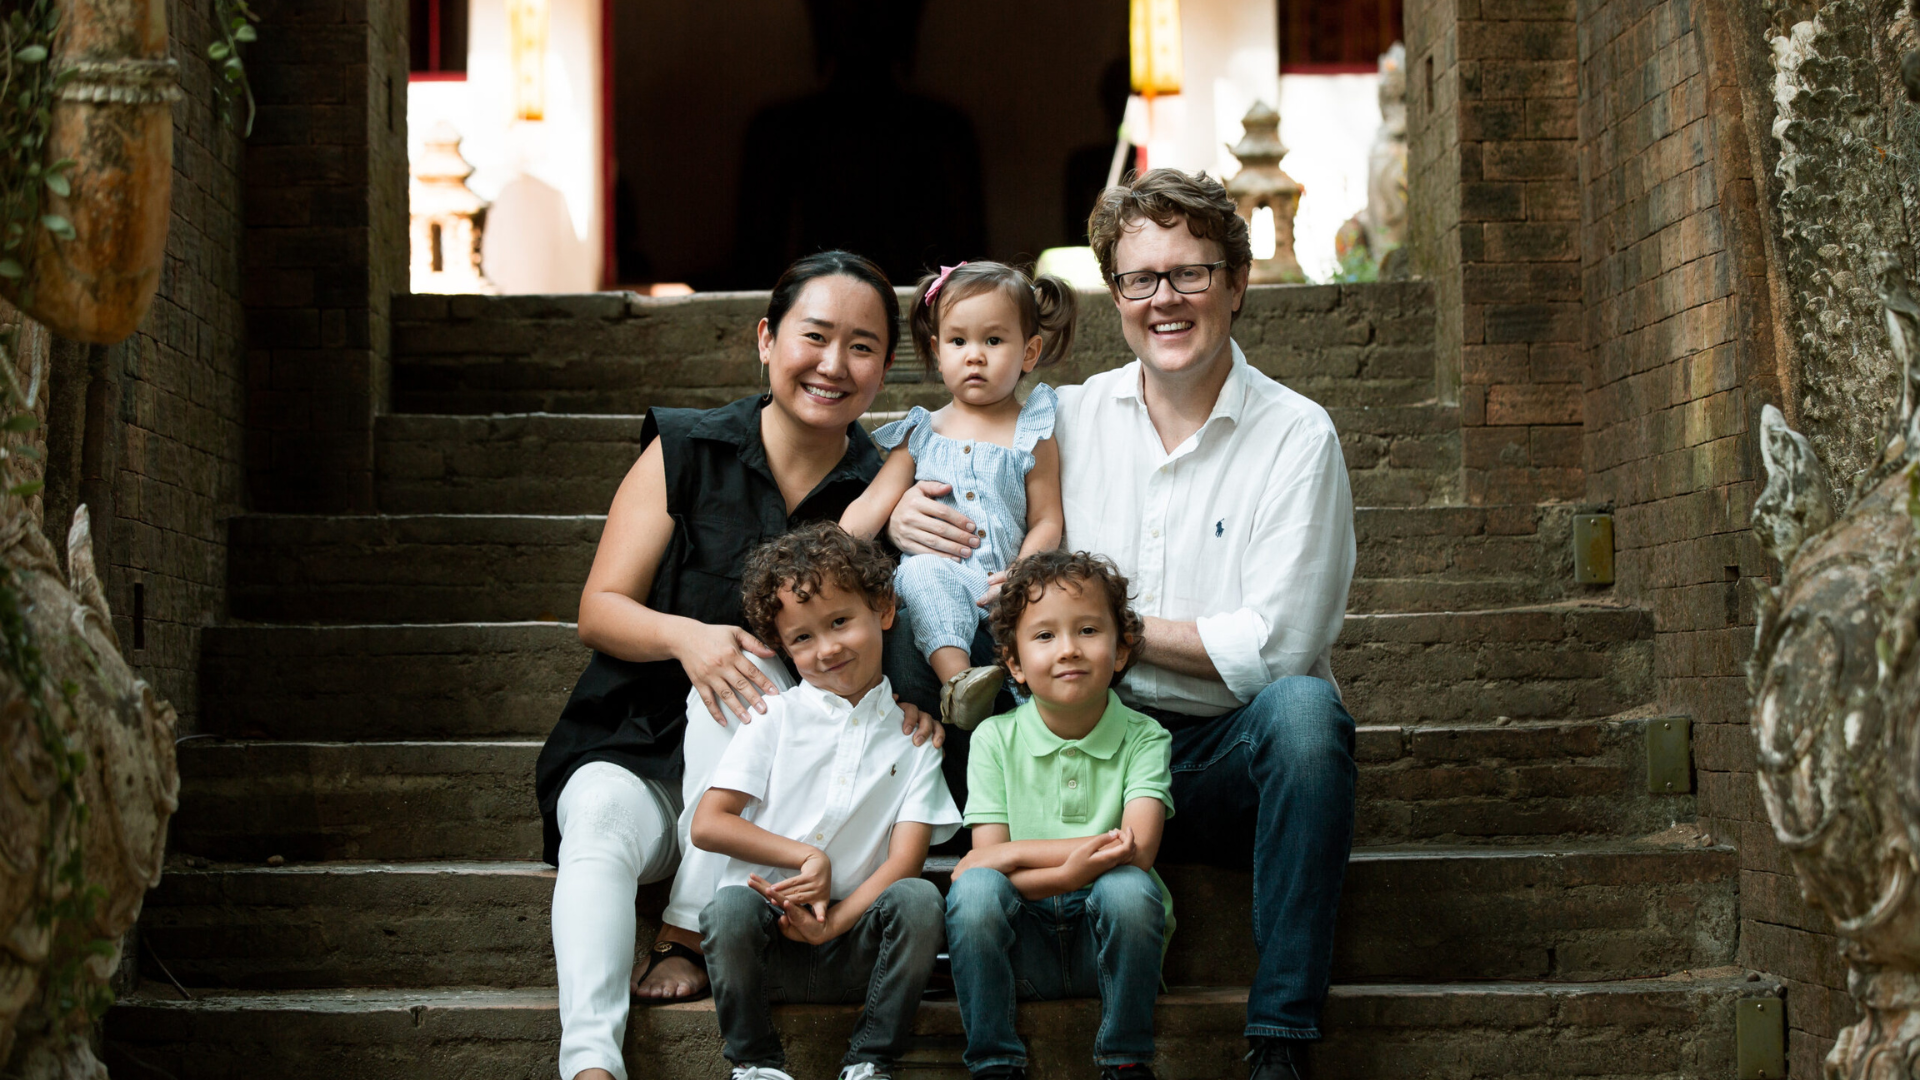 Jake & Honah Finn | Cornerstone Counseling Ministries | Thailand
Developing Leaders
